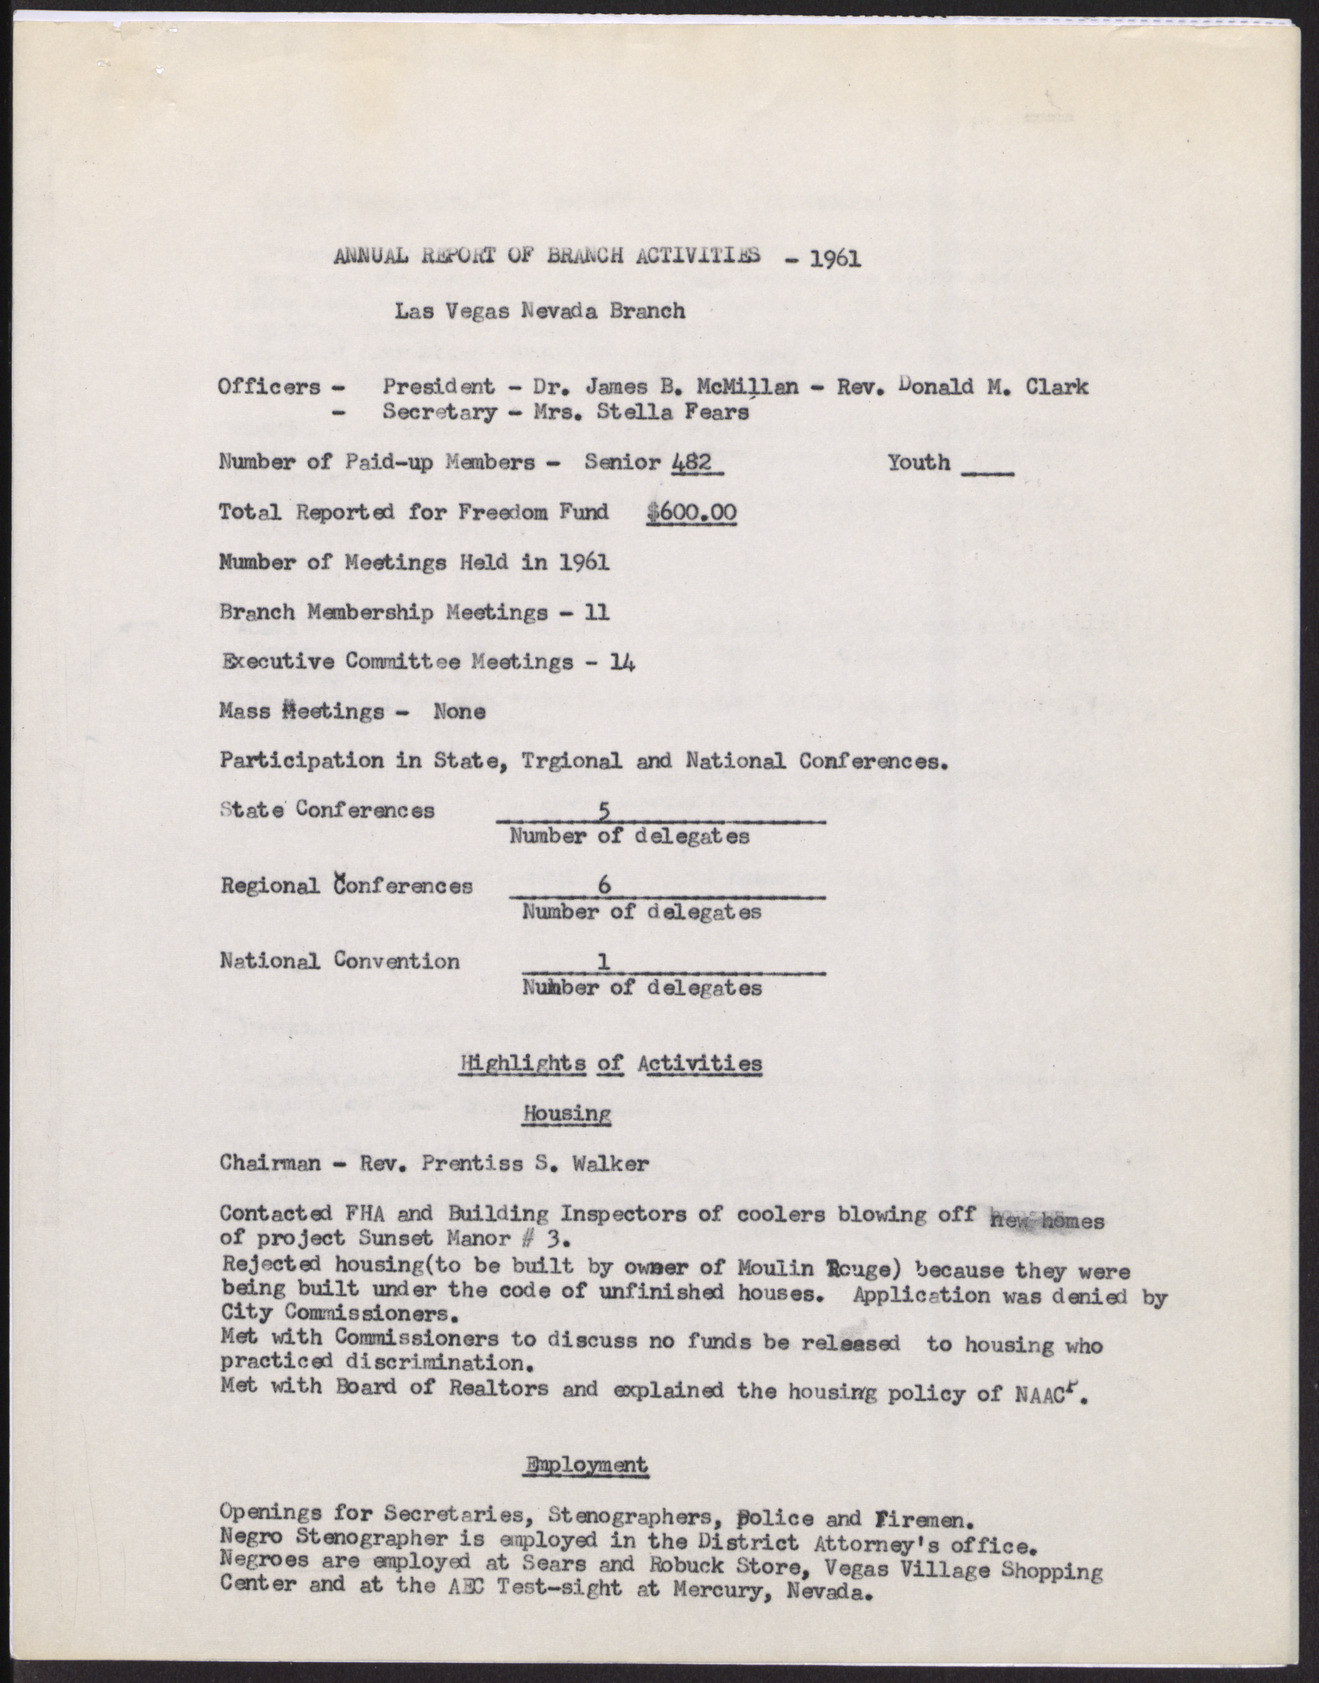 Annual report of Las Vegas NAACP branch activities (2 pages), 1961